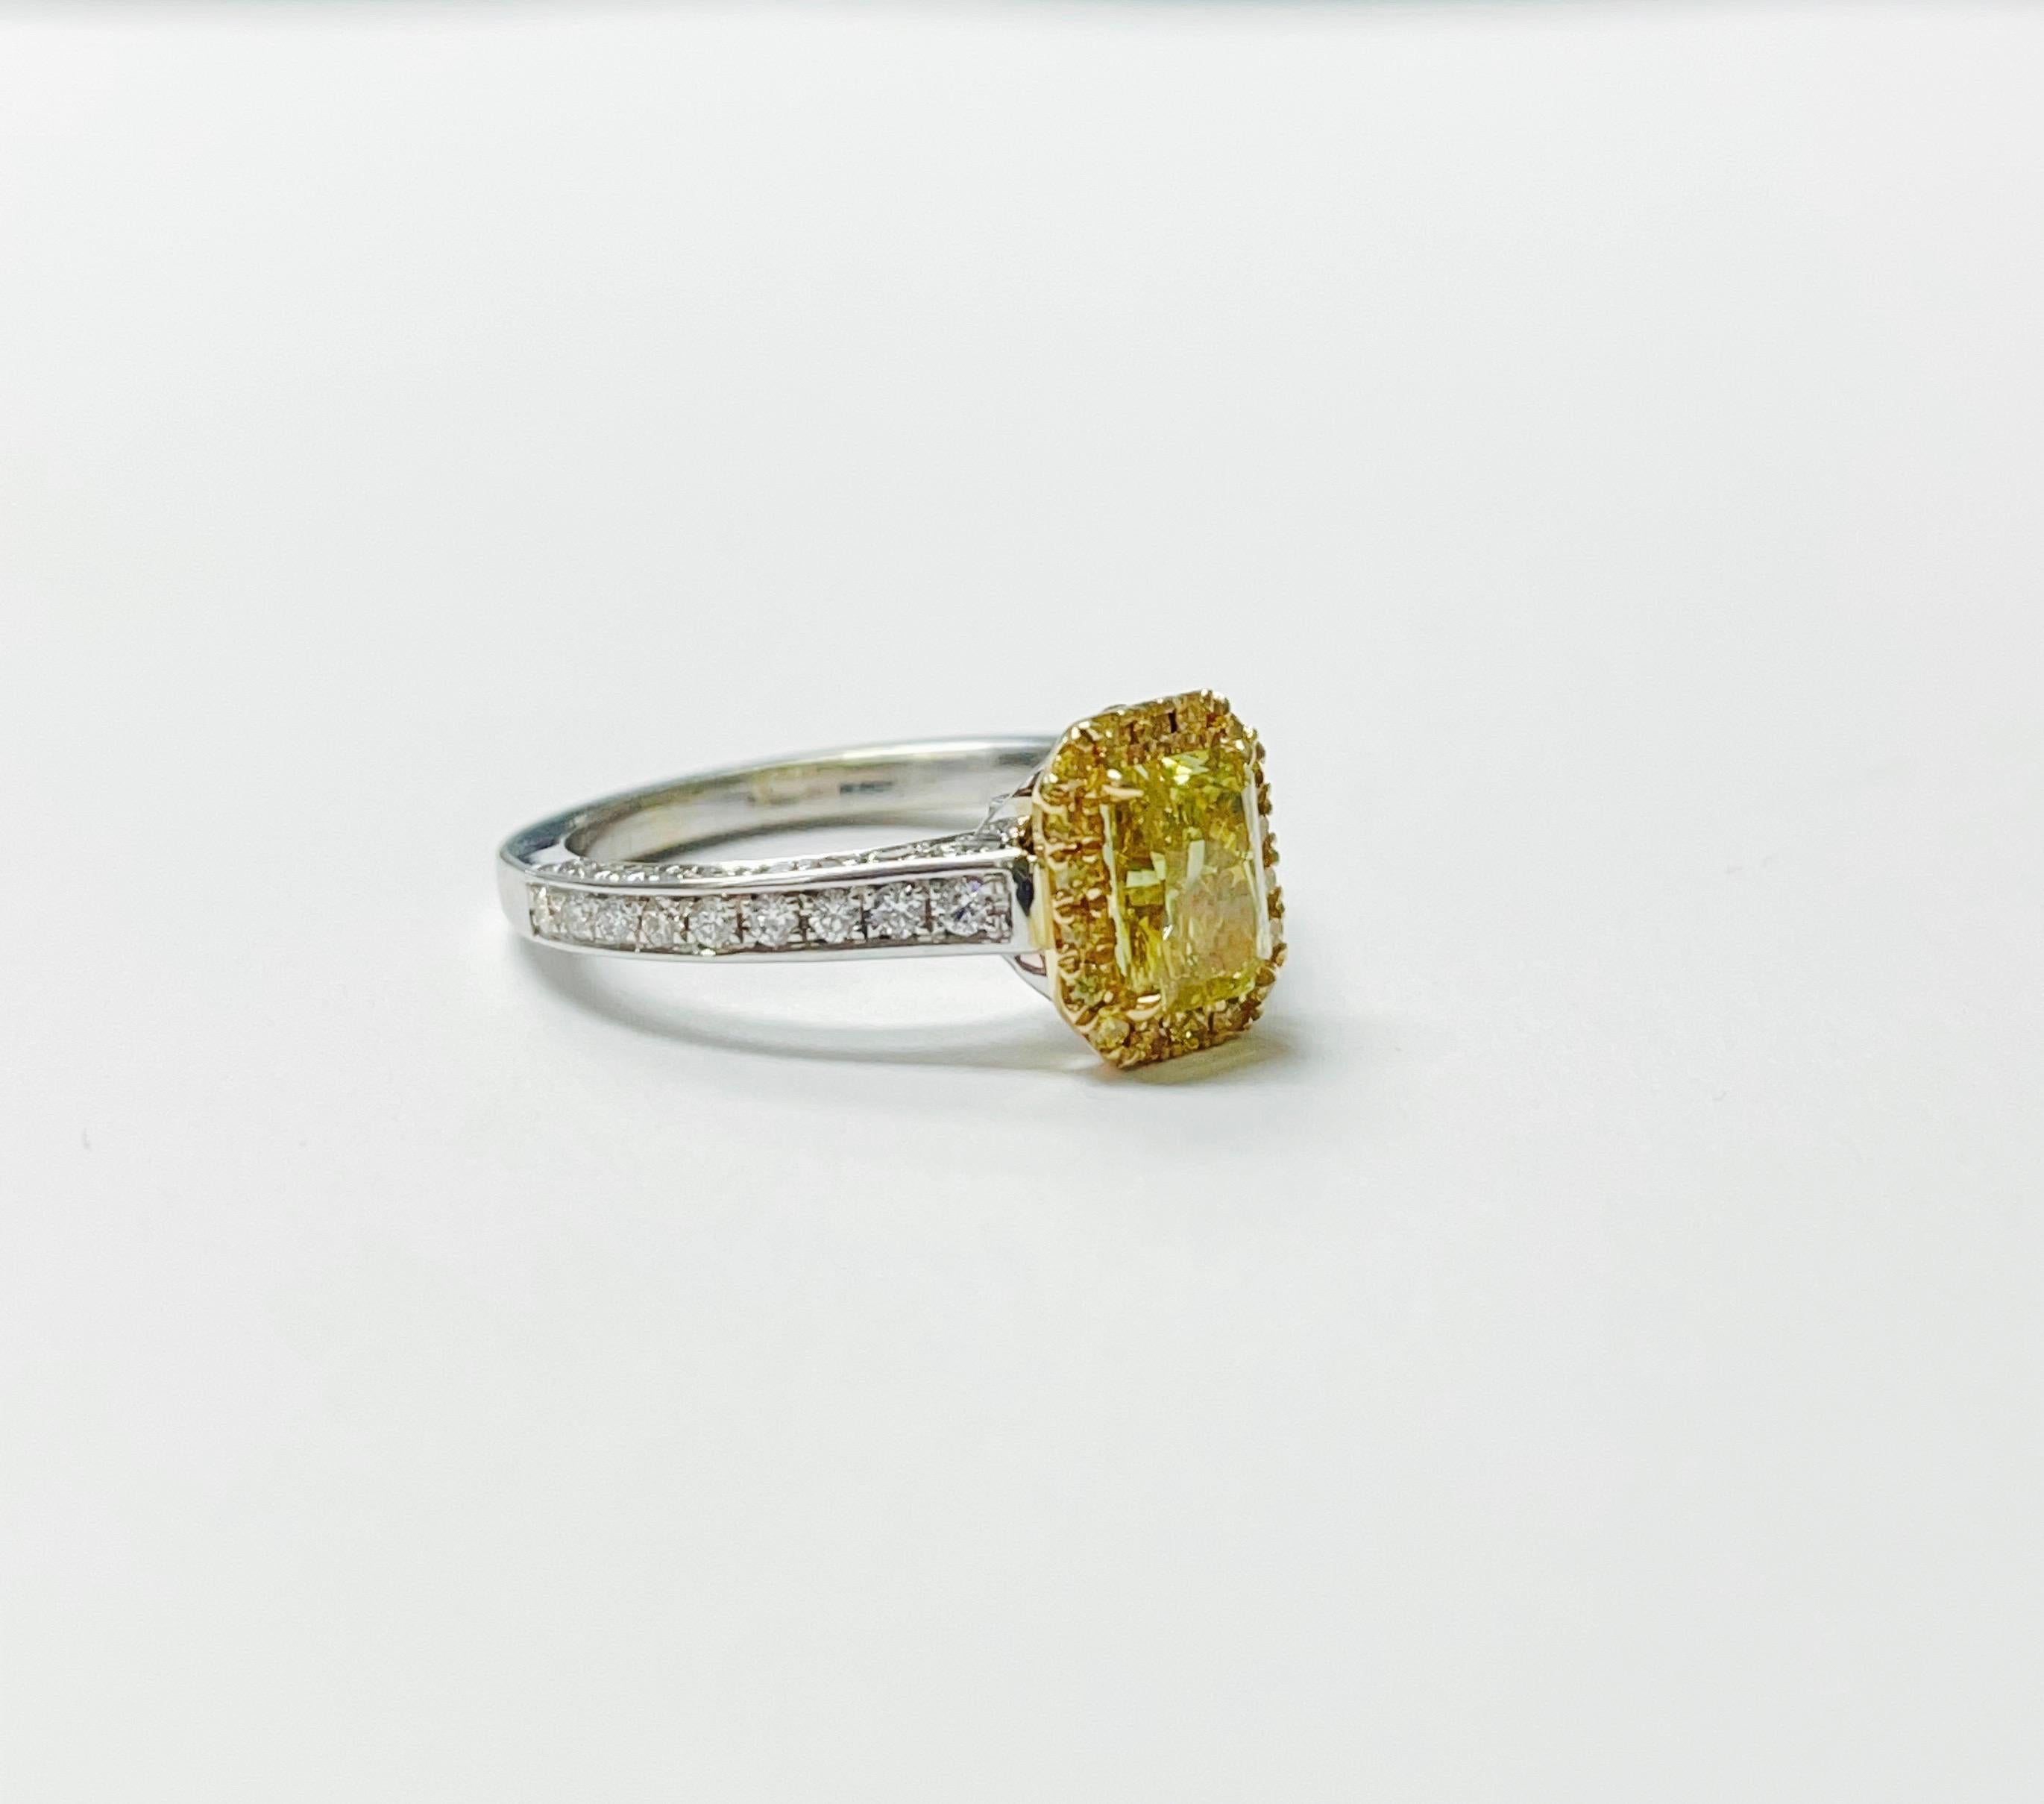 GIA certified Fancy Deep Yellow Radiant Cut Diamond Engagement Ring handcrafted in yellow gold. 
The details are as follows : 
Diamond weight : 1.13 carat 
Color : Fancy deep yellow 
Cut : cut cornered rectangular modified brilliant 
Clarity : SI1